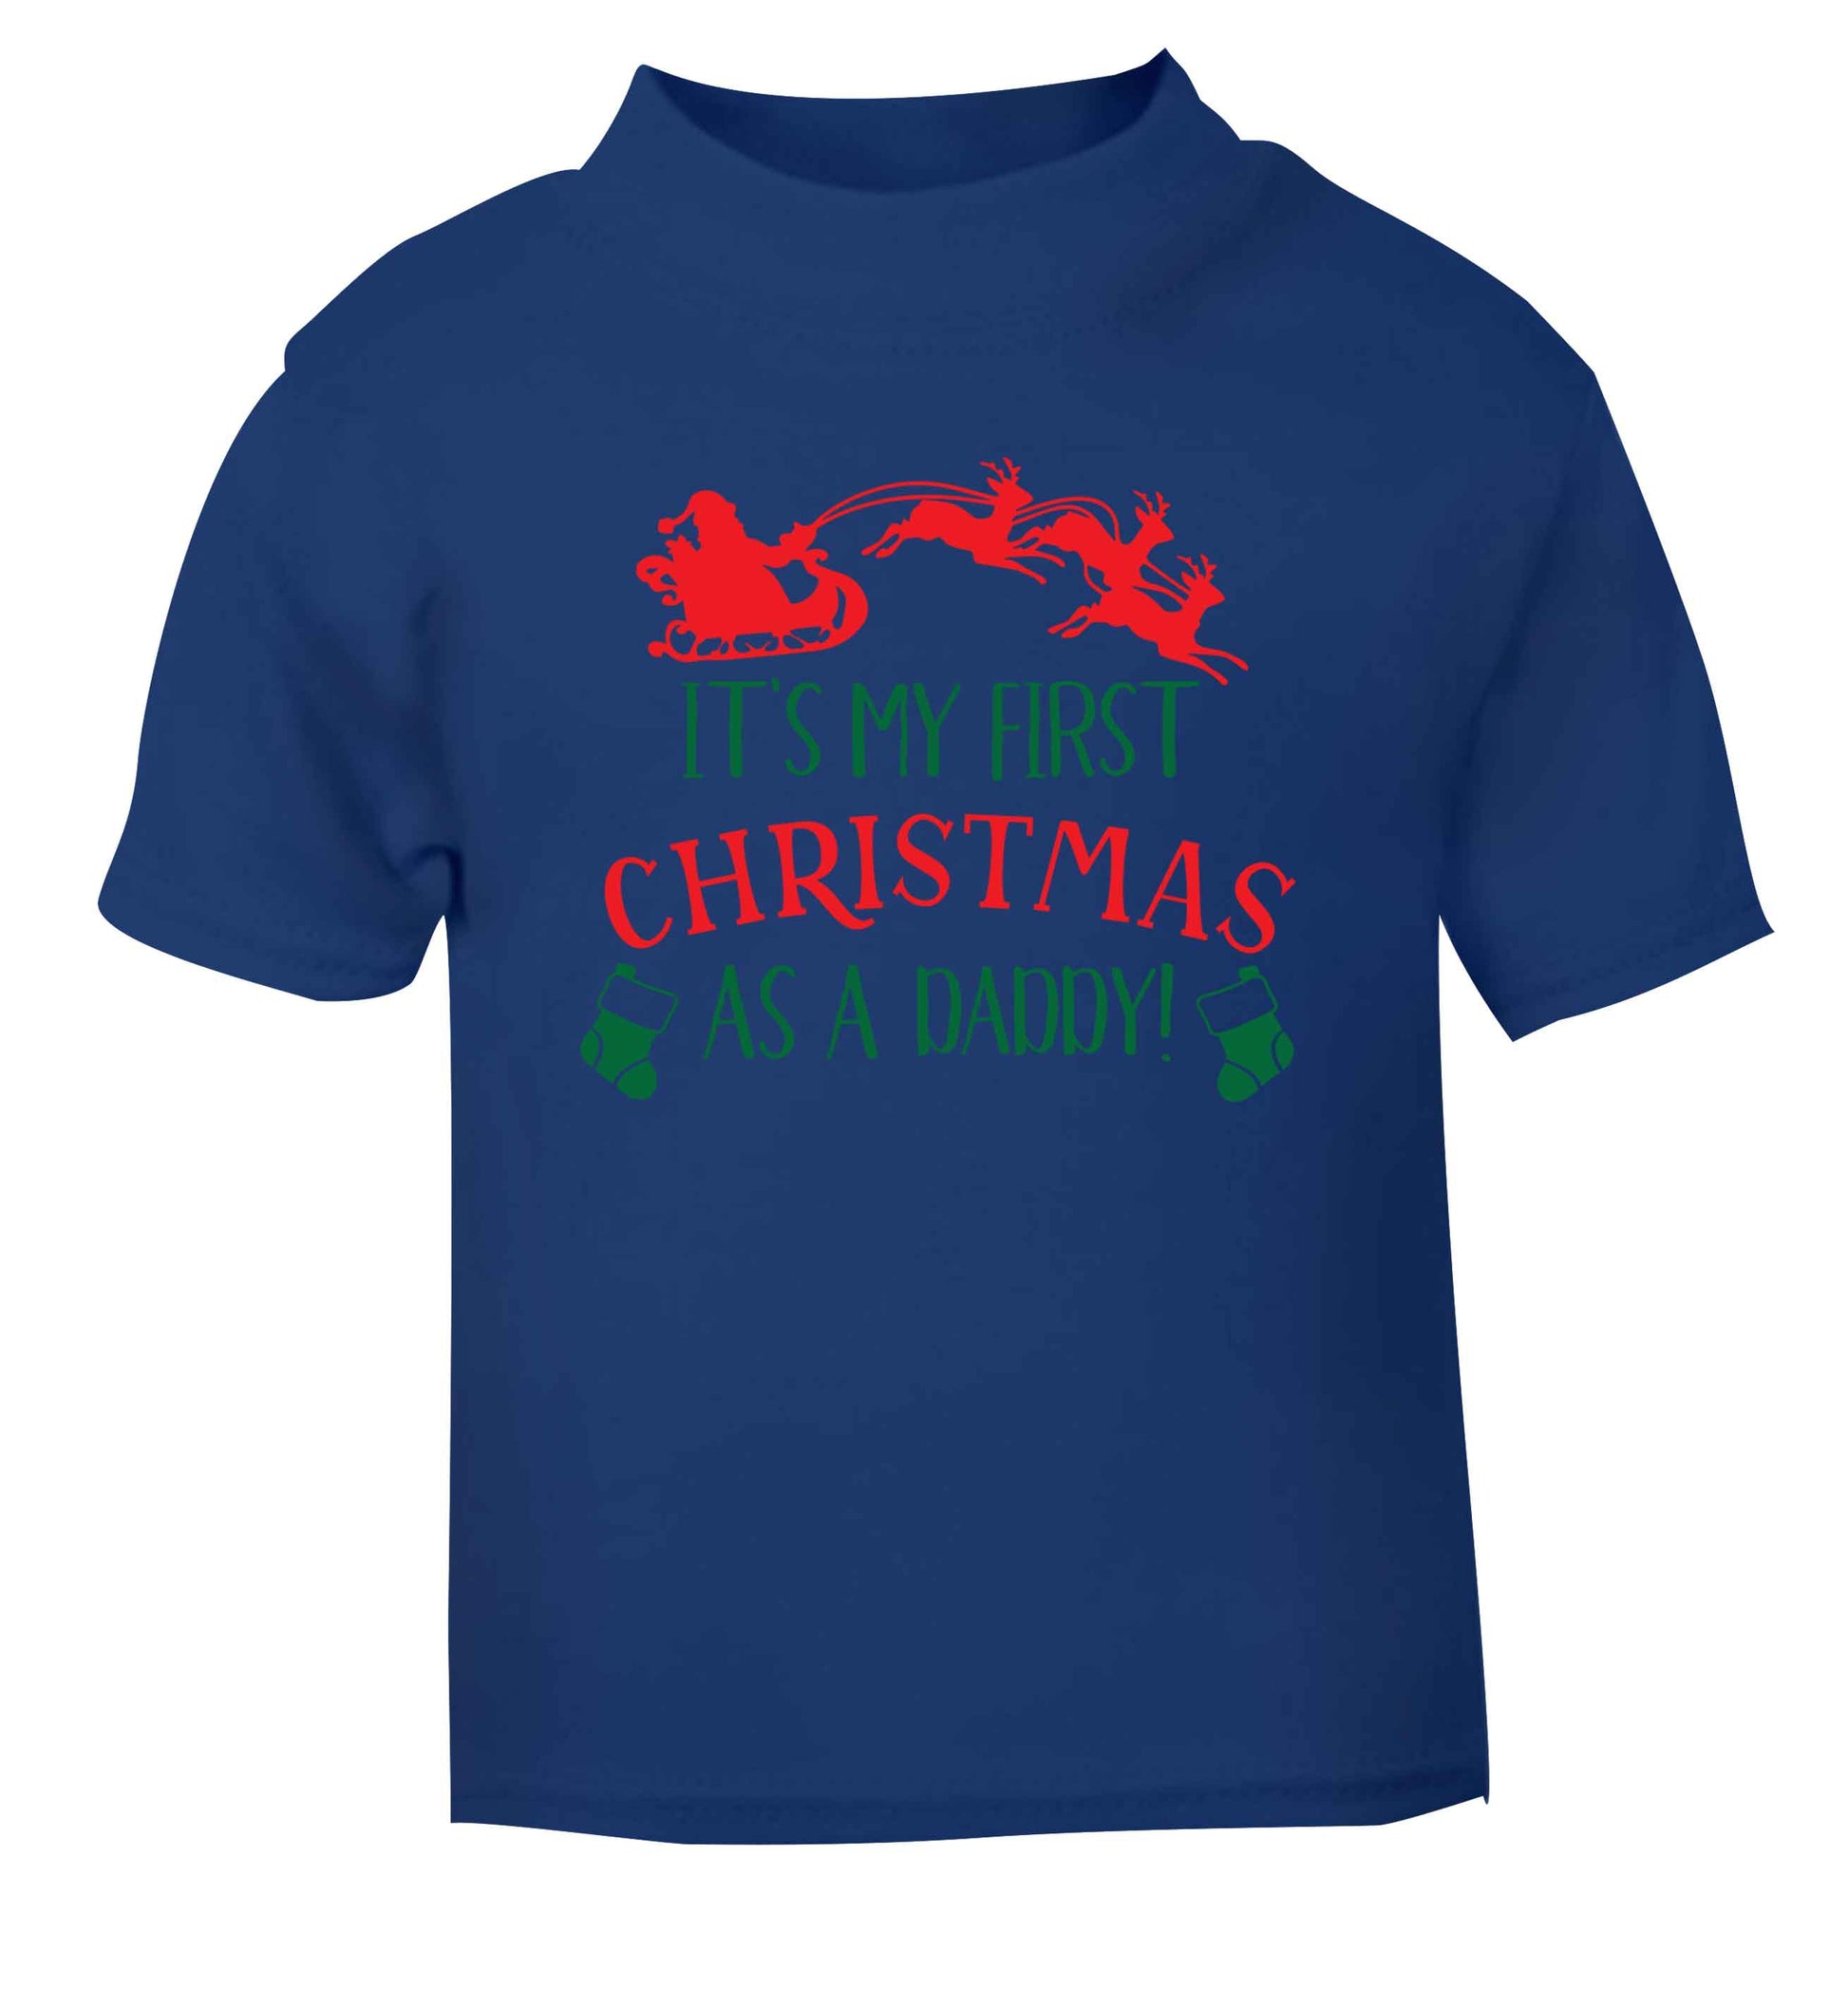 It's my first Christmas as a daddy blue Baby Toddler Tshirt 2 Years